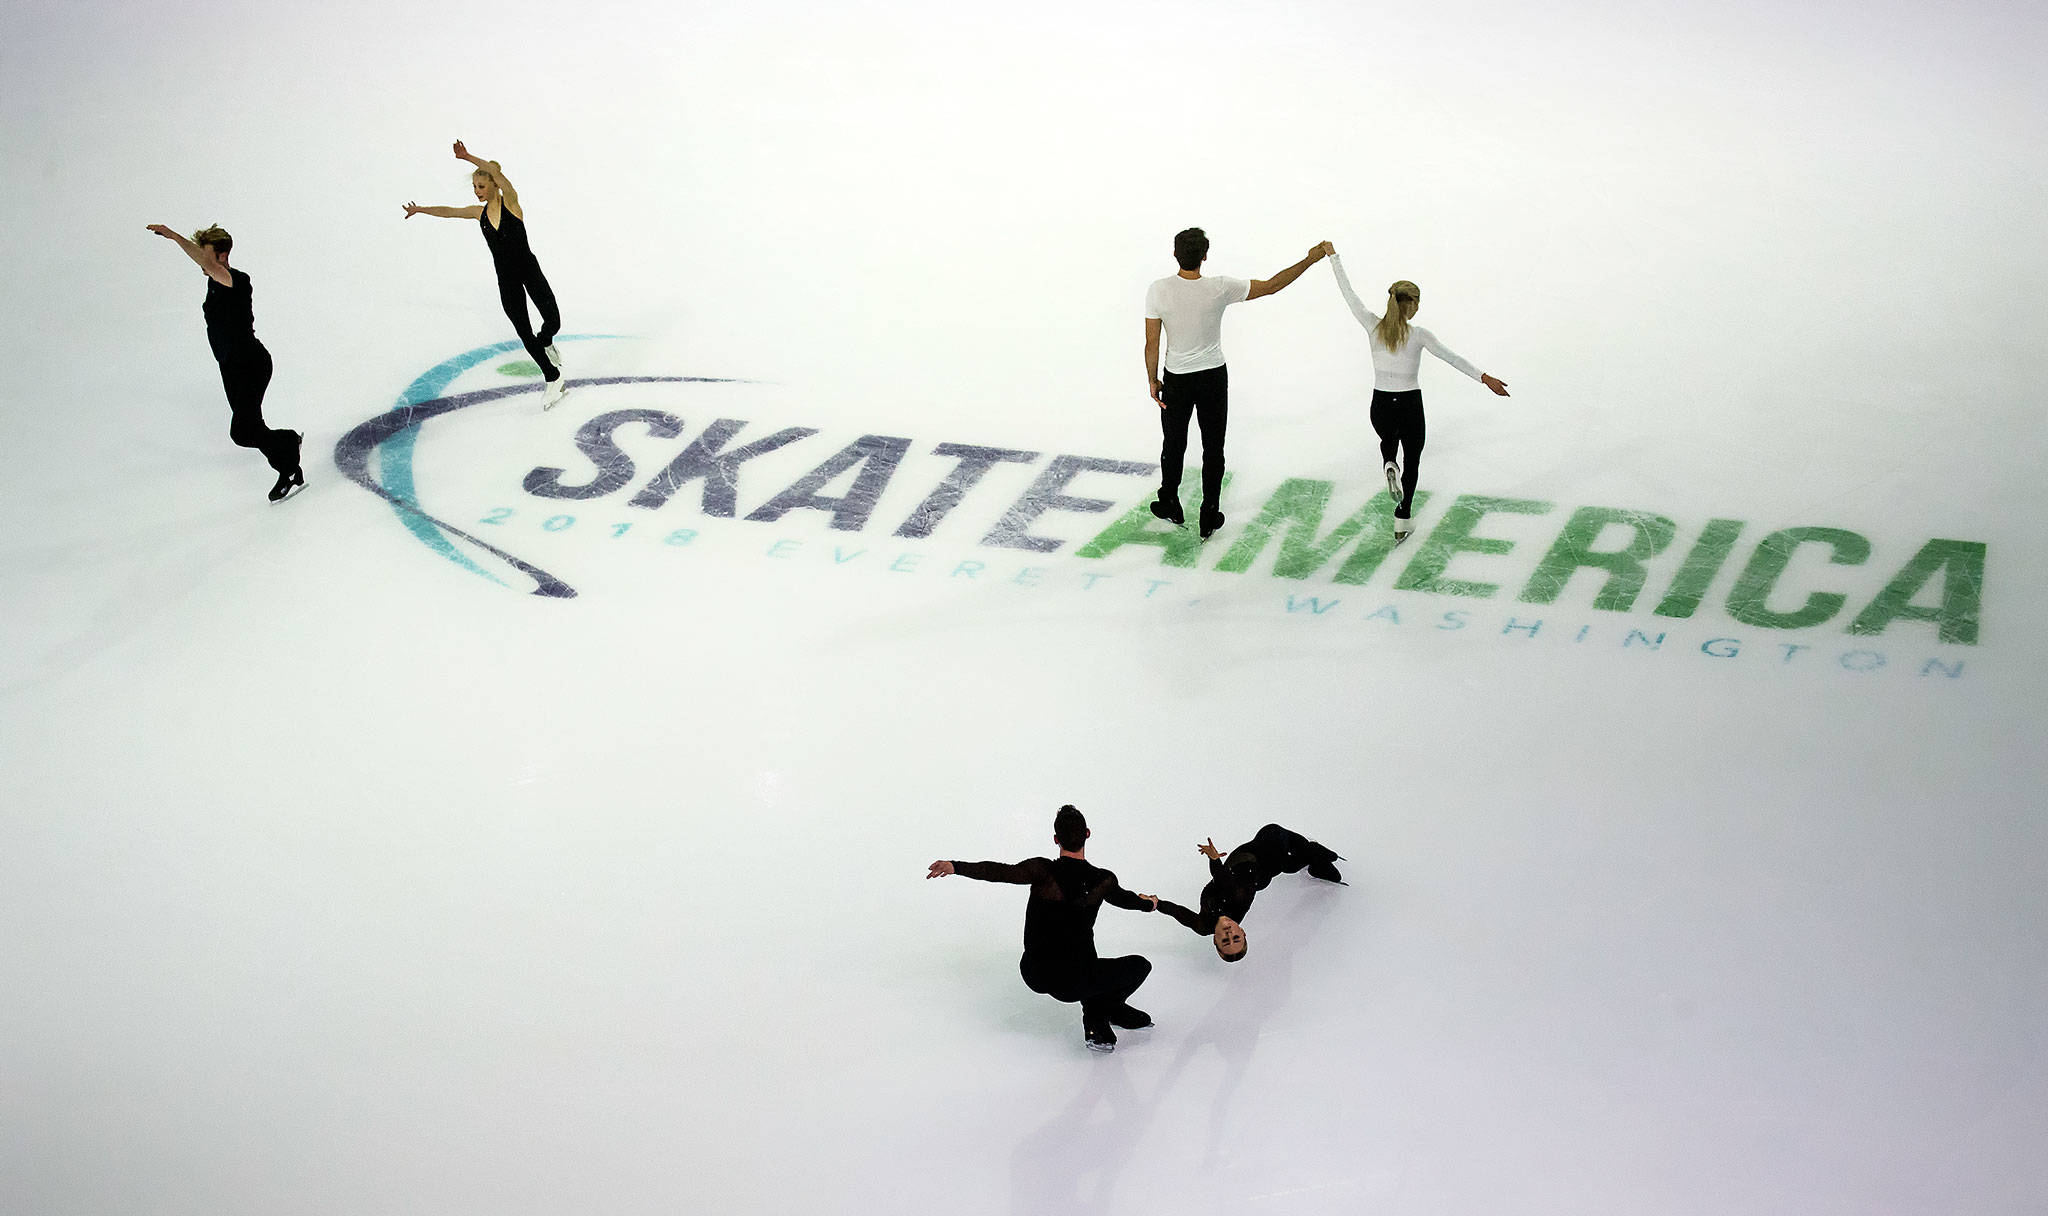 Pairs skaters (from left) Nica Digerness and Danny Neudecker (USA), Alexa Scimeca Knierim and Chris Knierim (USA), and Evelyn Walsh and Trennt Michaud (Canada) practice before the 2018 Skate America competition at Angel of the Winds Arena on Thursday in Everett. (Andy Bronson / The Herald)